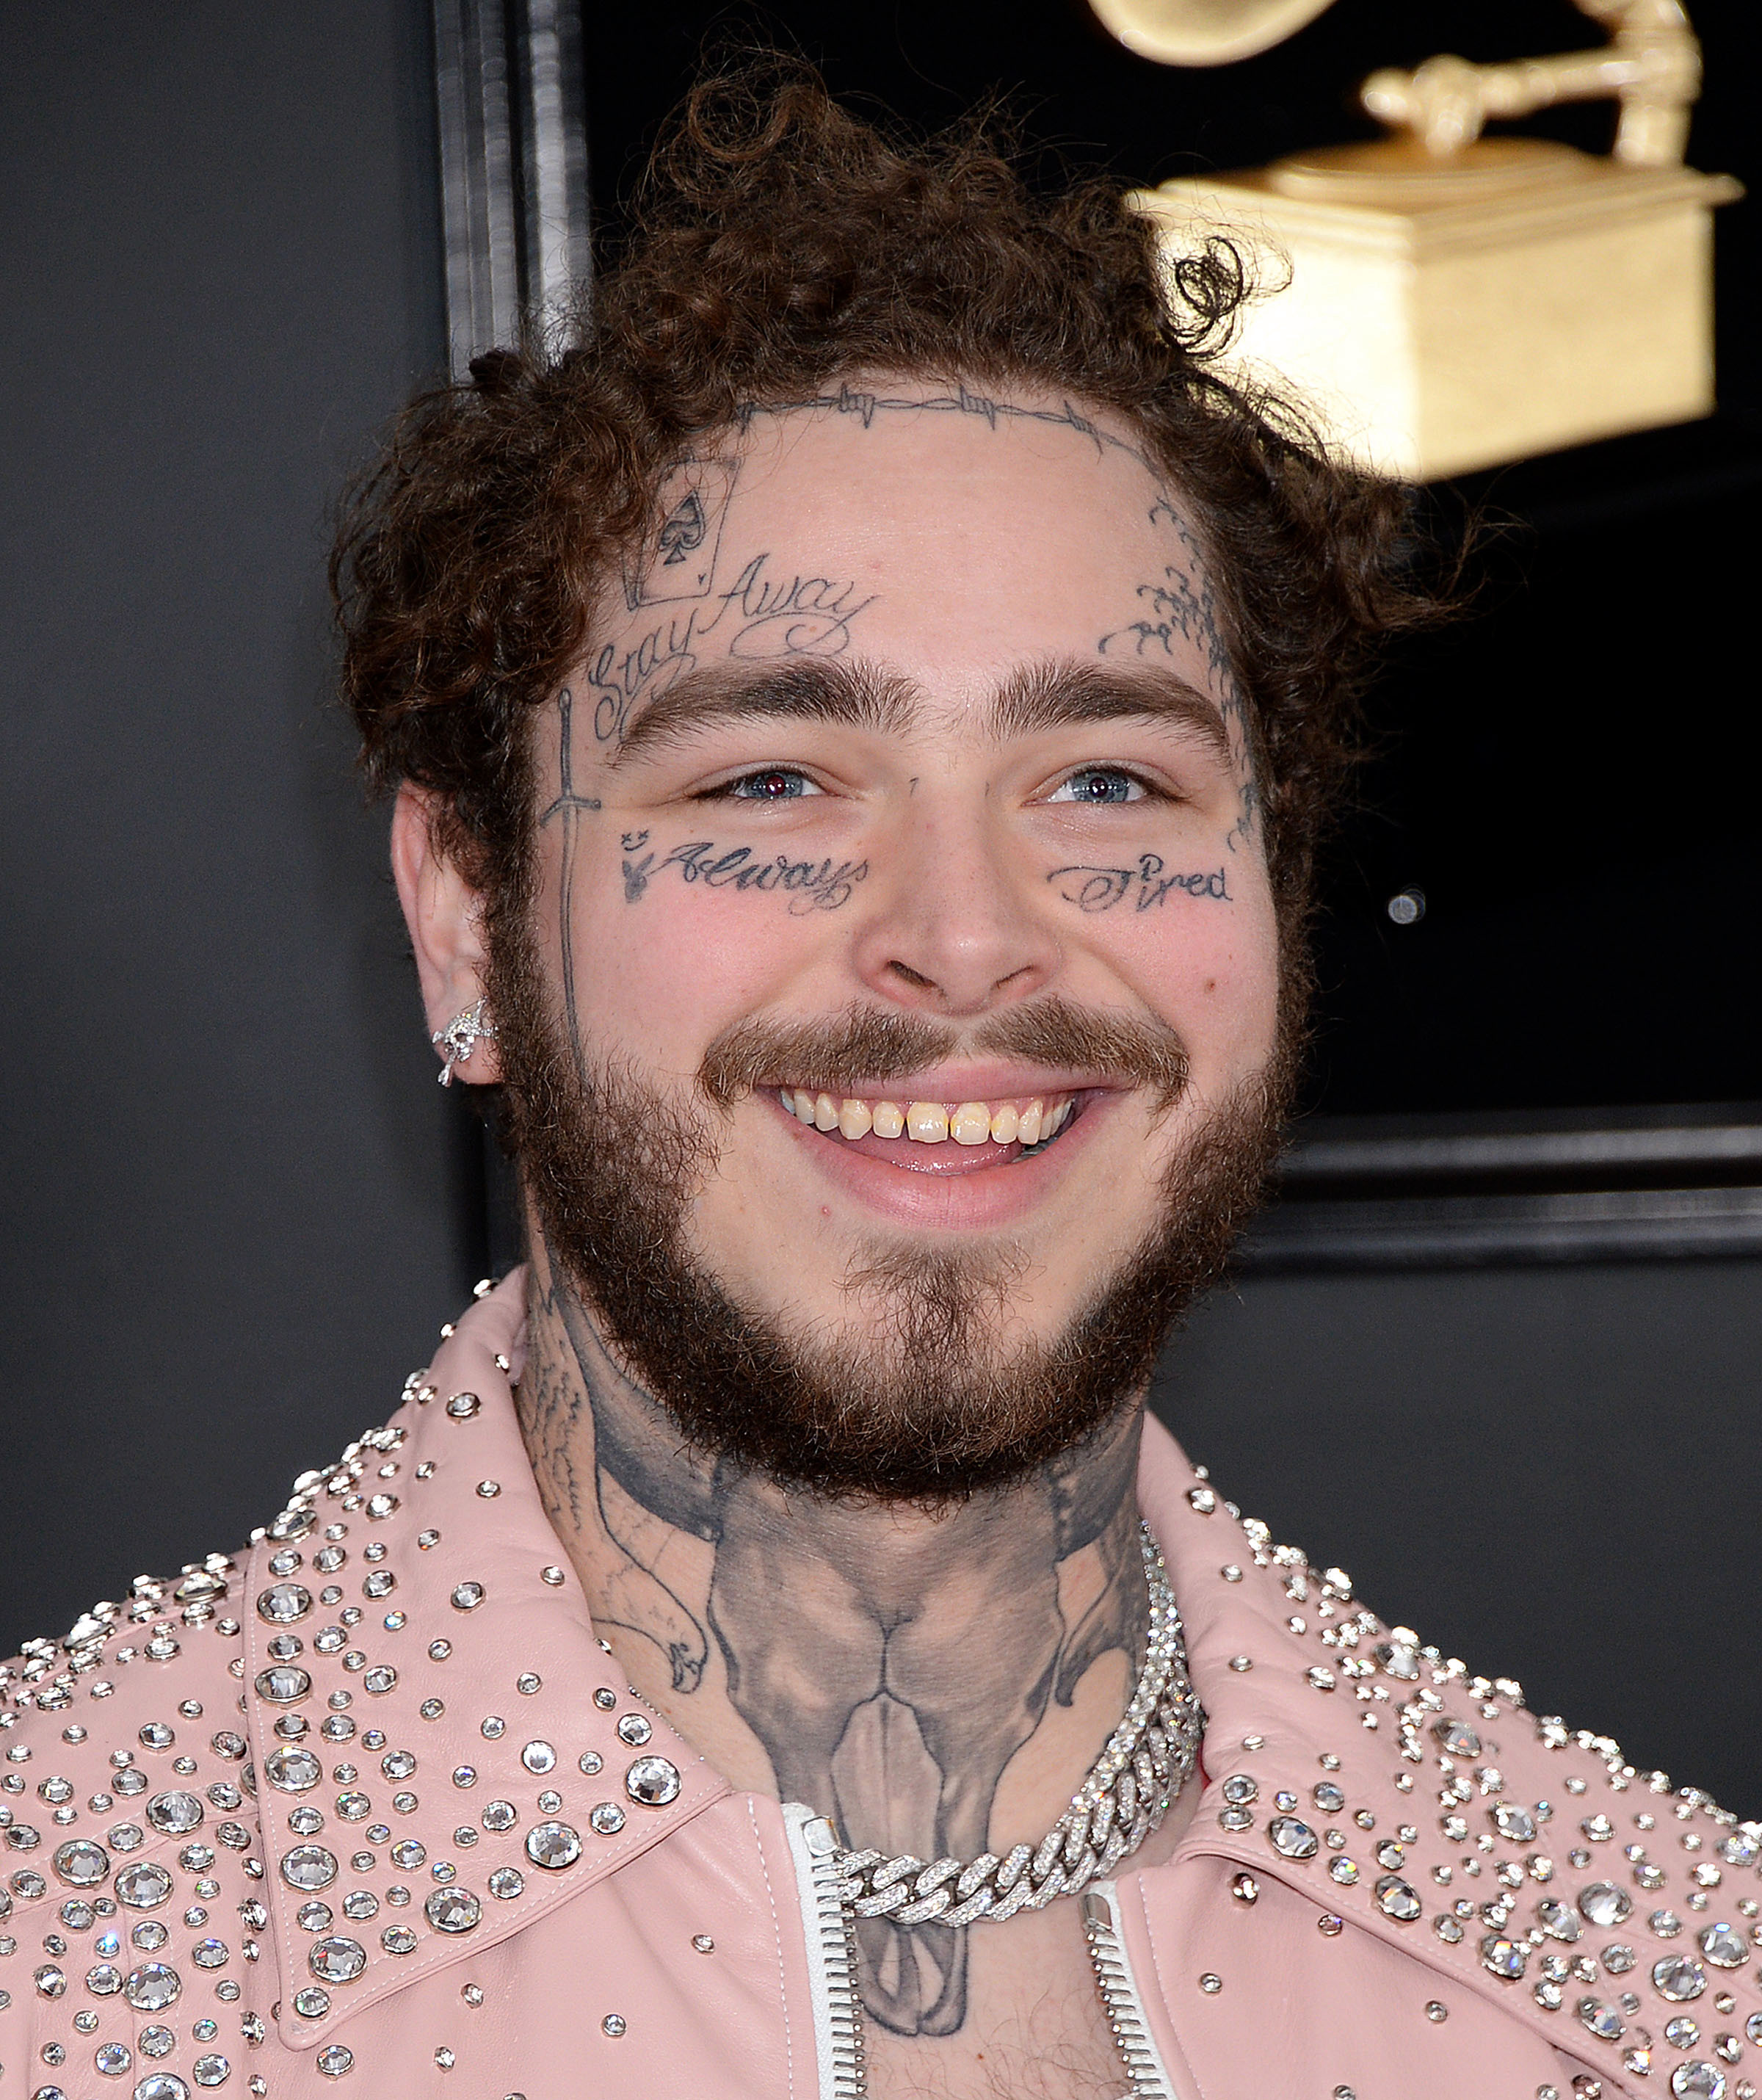 Post Malone Live In Toronto 2019 | Tickets Thur 03 Oct